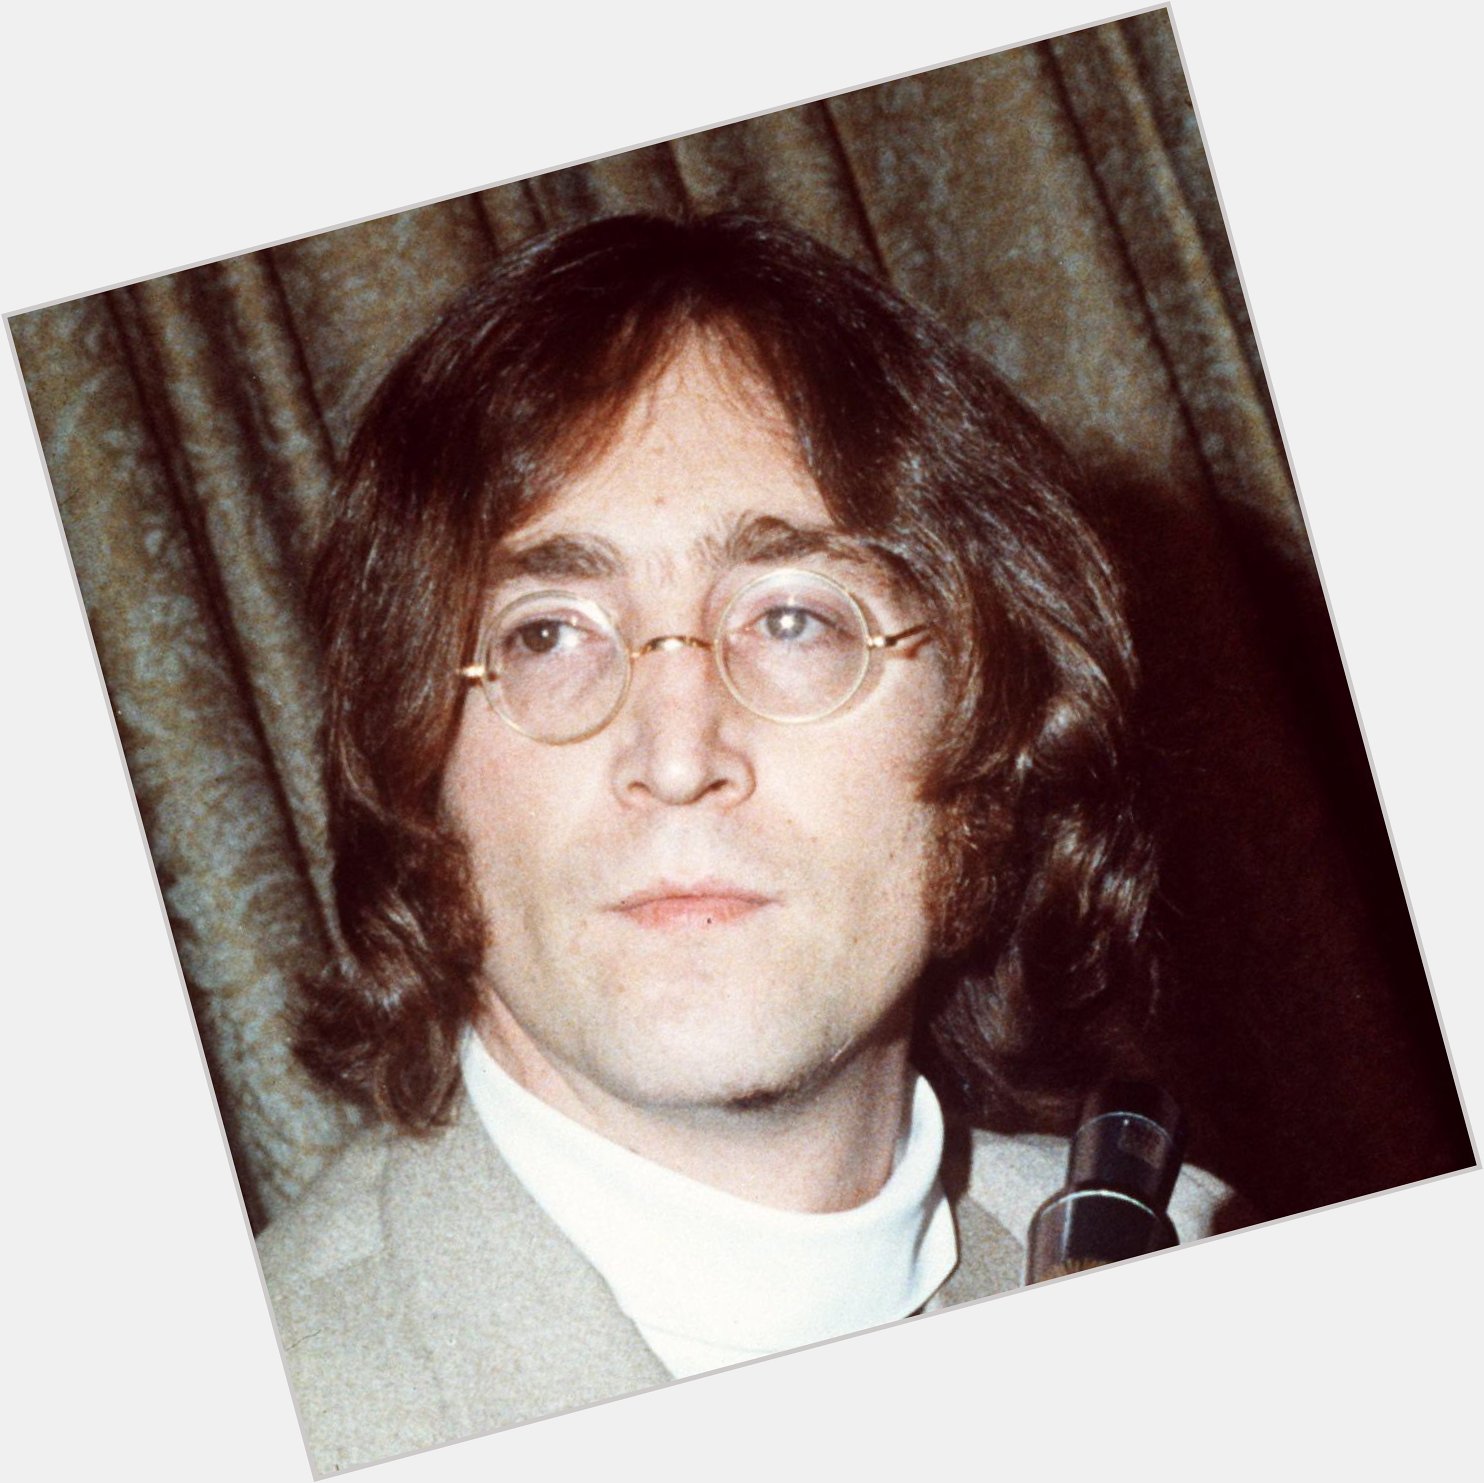 He could\ve been 77 this year. Happy birthday John Lennon! 